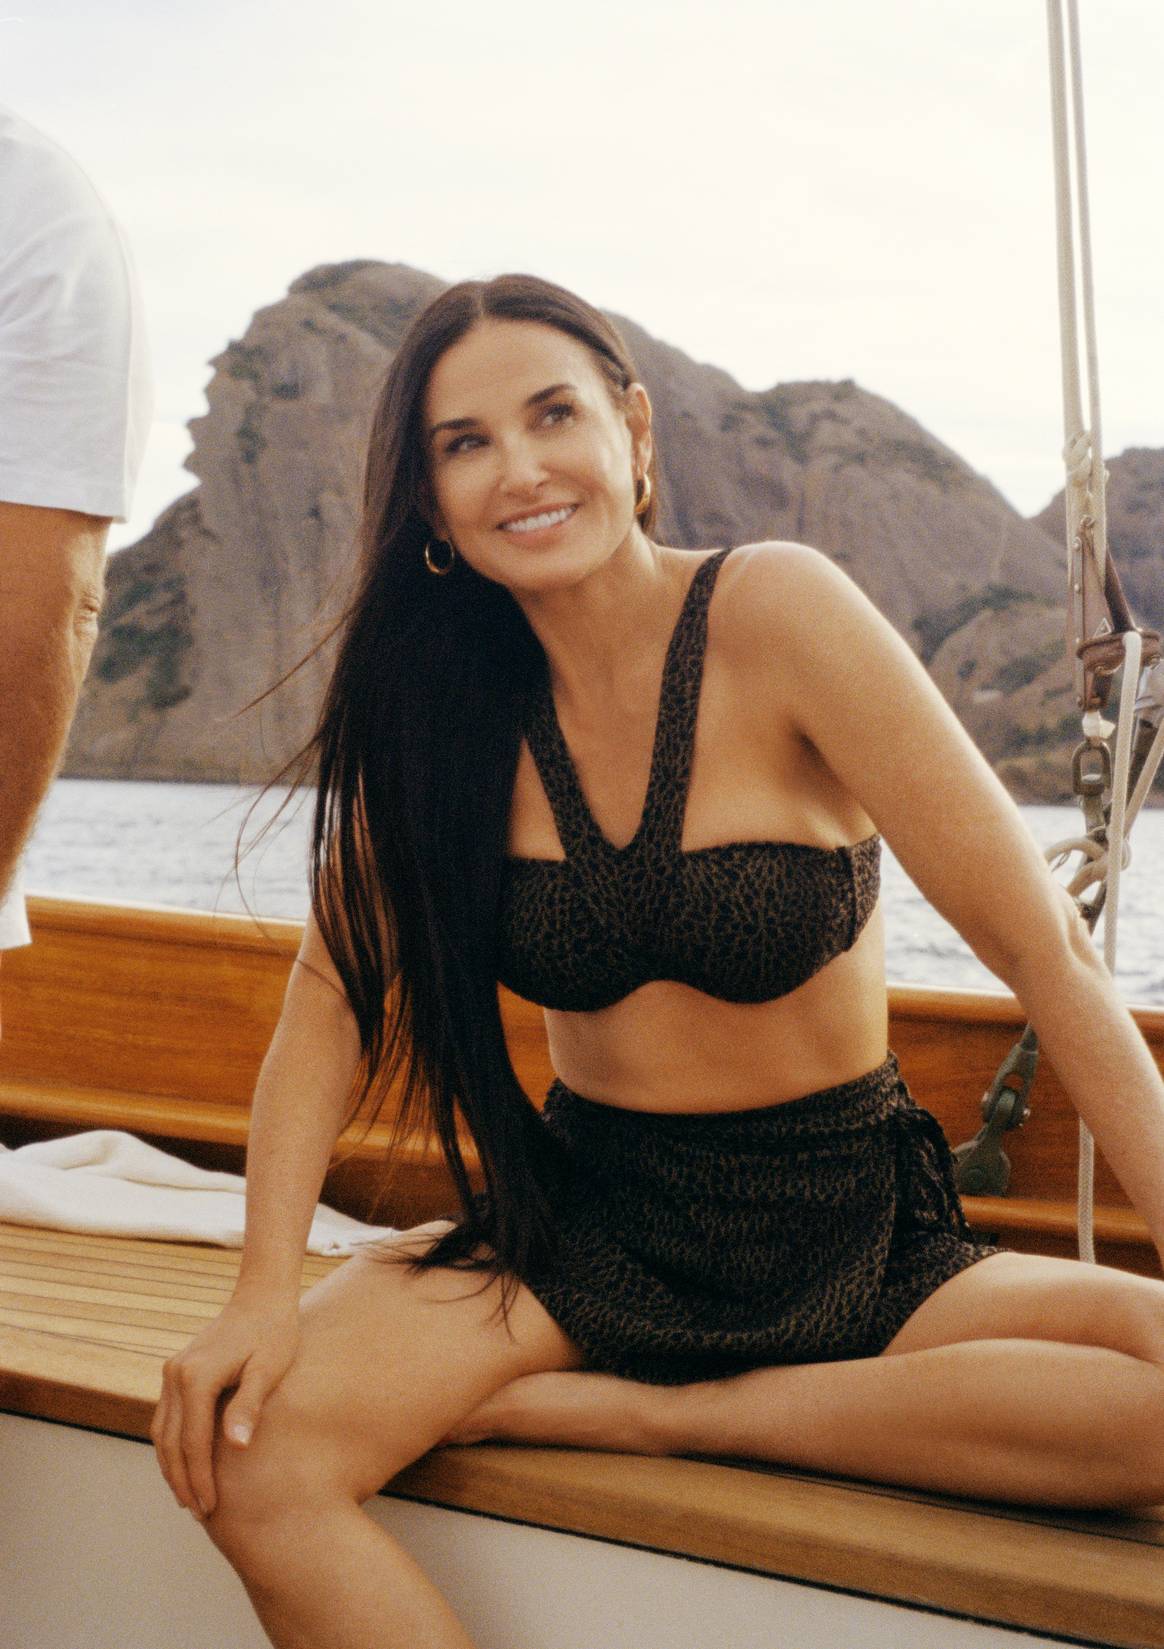 Image: Demi Moore x Andie by Drew Escriva